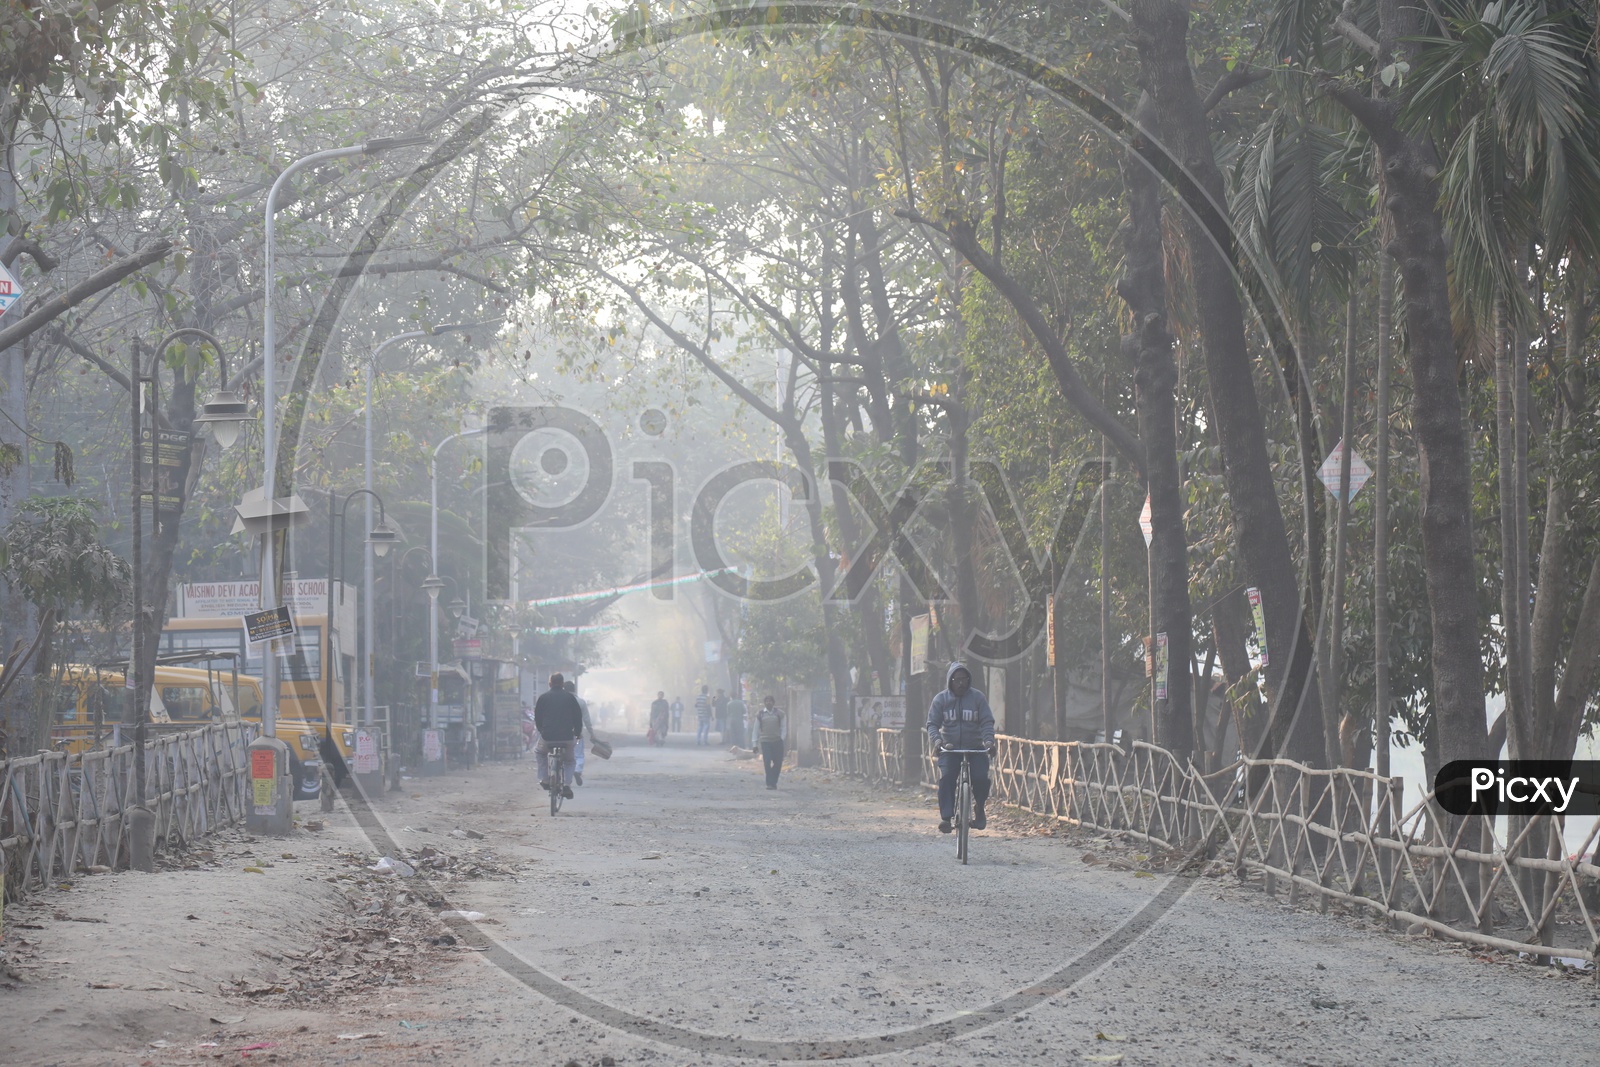 Locals Riding Bicycles On the Streets in Early Mornings